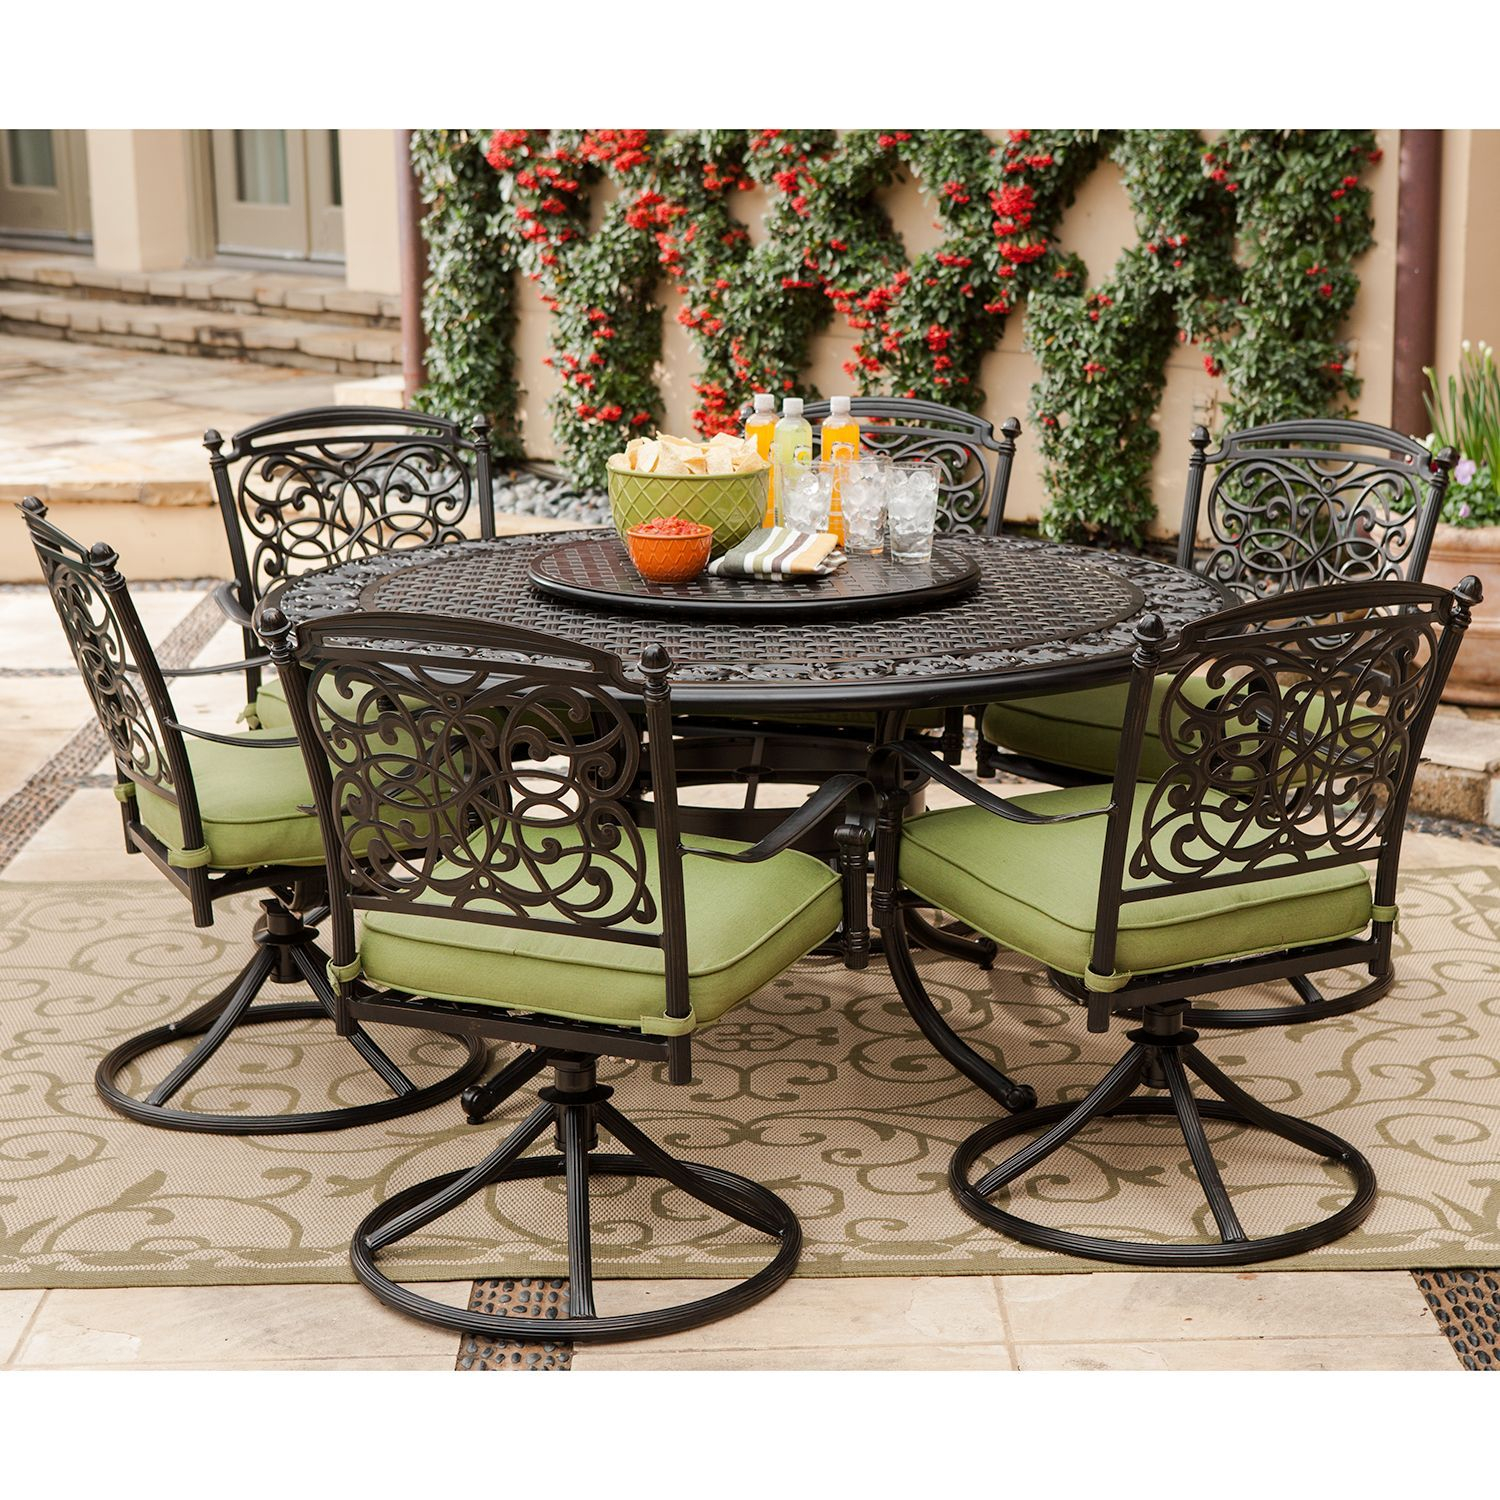 Renaissance Outdoor Patio Dining Set 9 Pc Sams Club within proportions 1500 X 1500